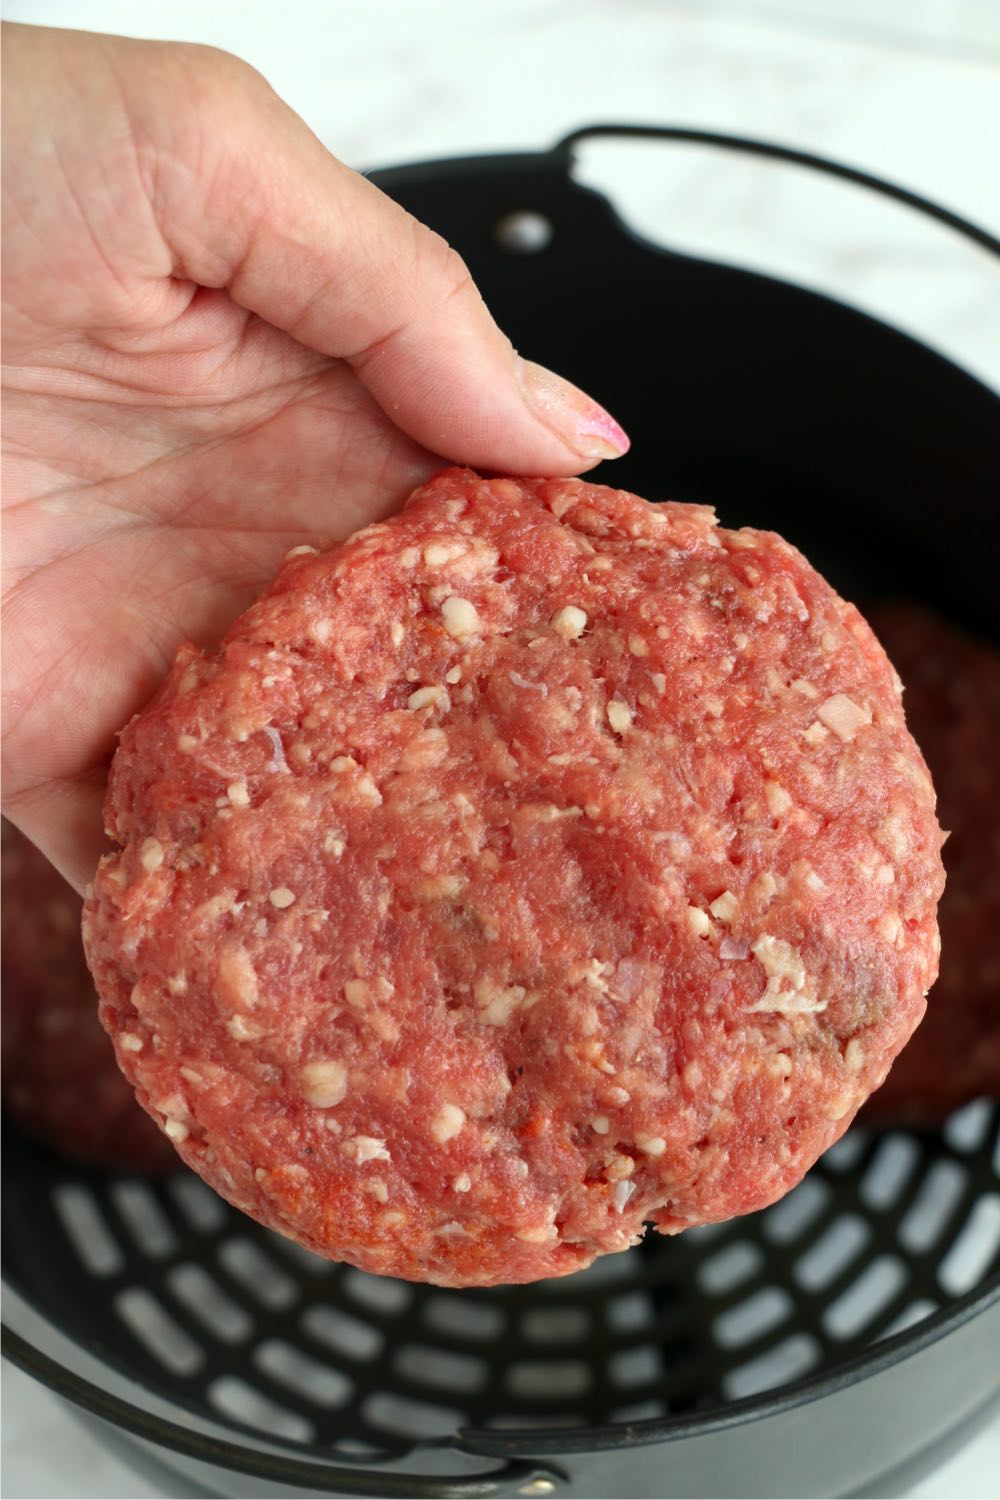 ground beef formed into a hamburger patty